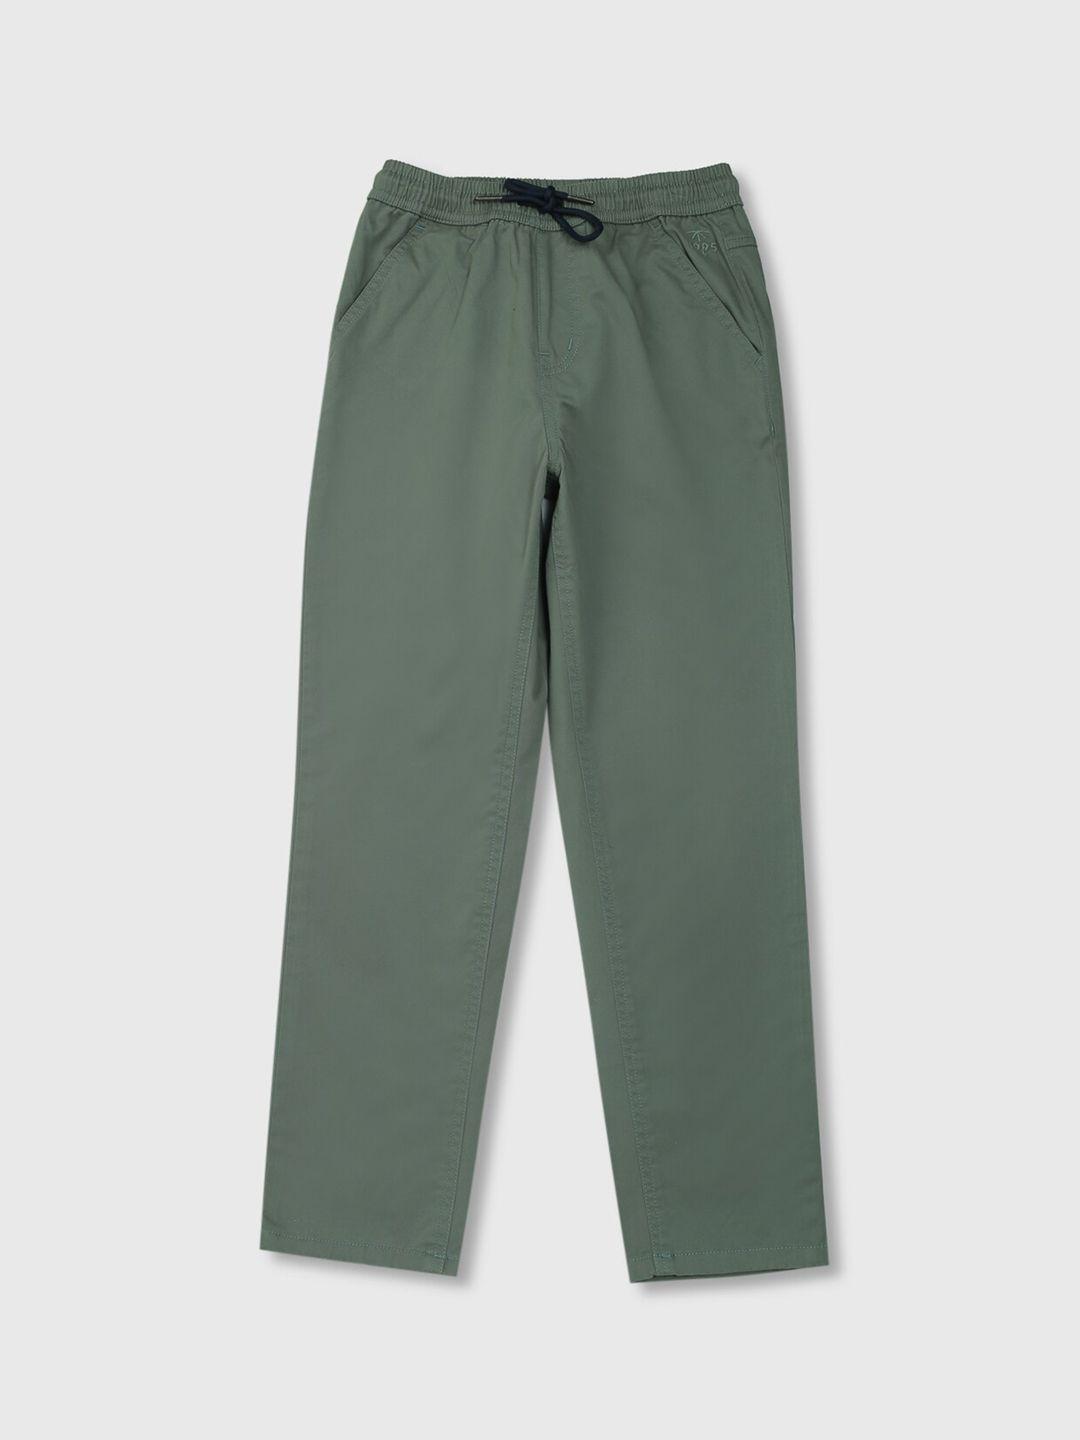 Palm Tree Boys Green Solid Trousers